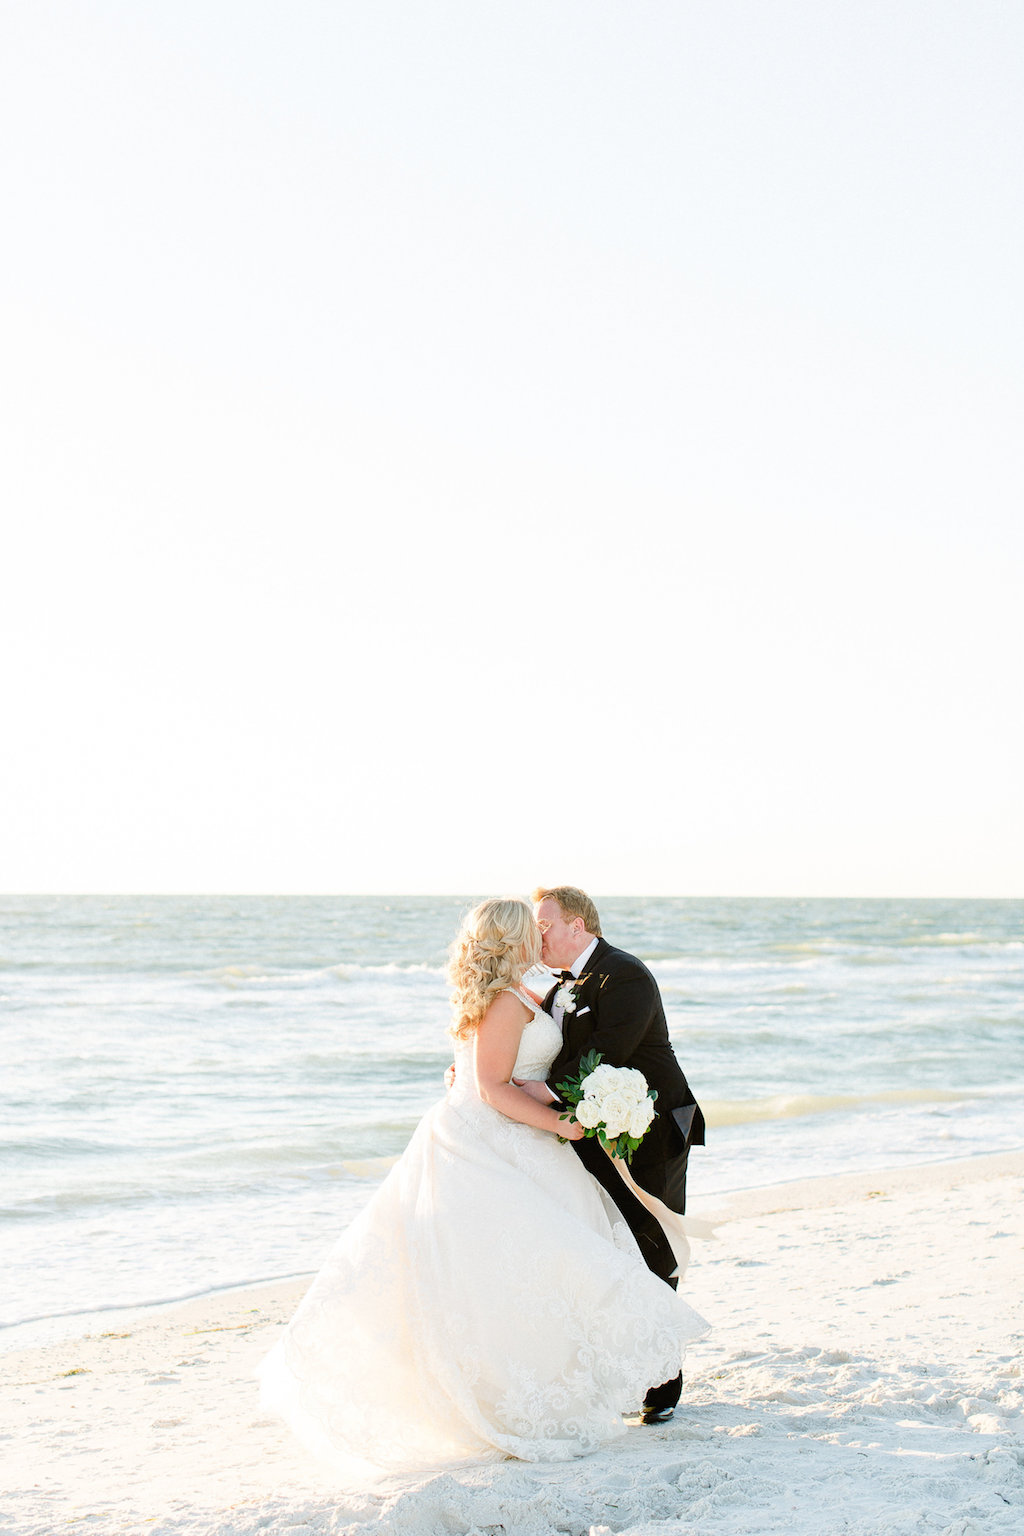 Beach Wedding Bride and Groom Portrait with White Rose and Greenery Bouquet with Long Gold Ribbon, Groom in Black Tuxedo | Tampa Bay Beachfront Wedding Venue The Carlouel Yacht Club | Clearwater Wedding Photographer Ailyn La Torre Photography